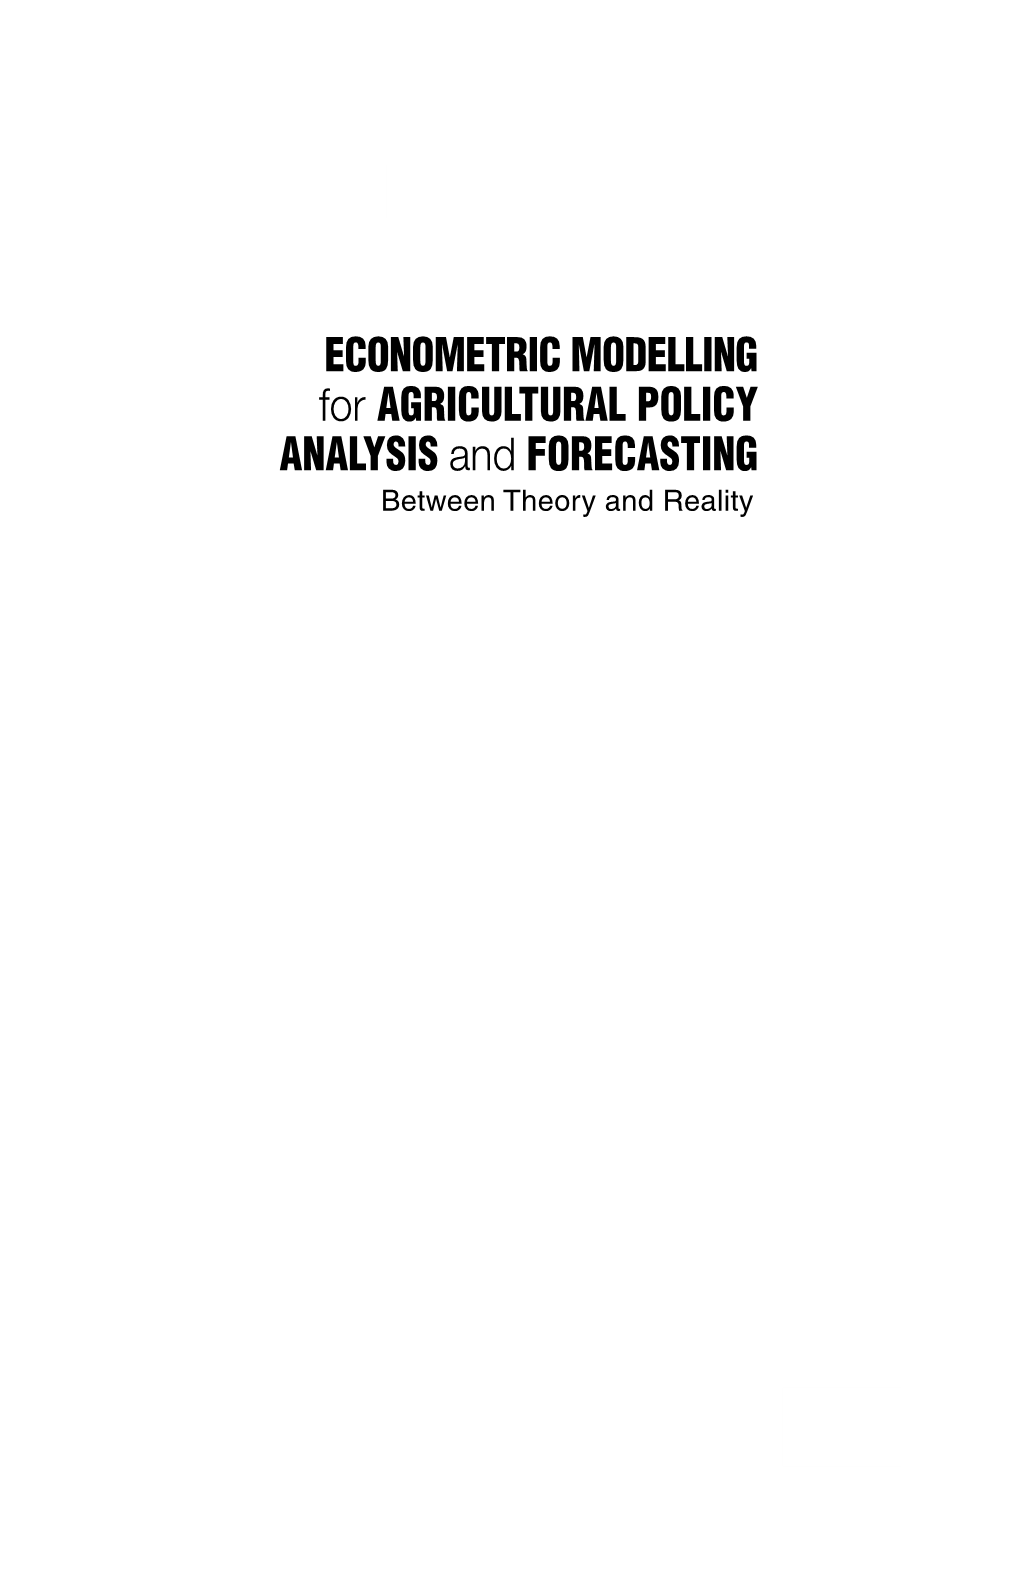 ECONOMETRIC MODELLING for AGRICULTURAL POLICY ANALYSIS and FORECASTING Between Theory and Reality